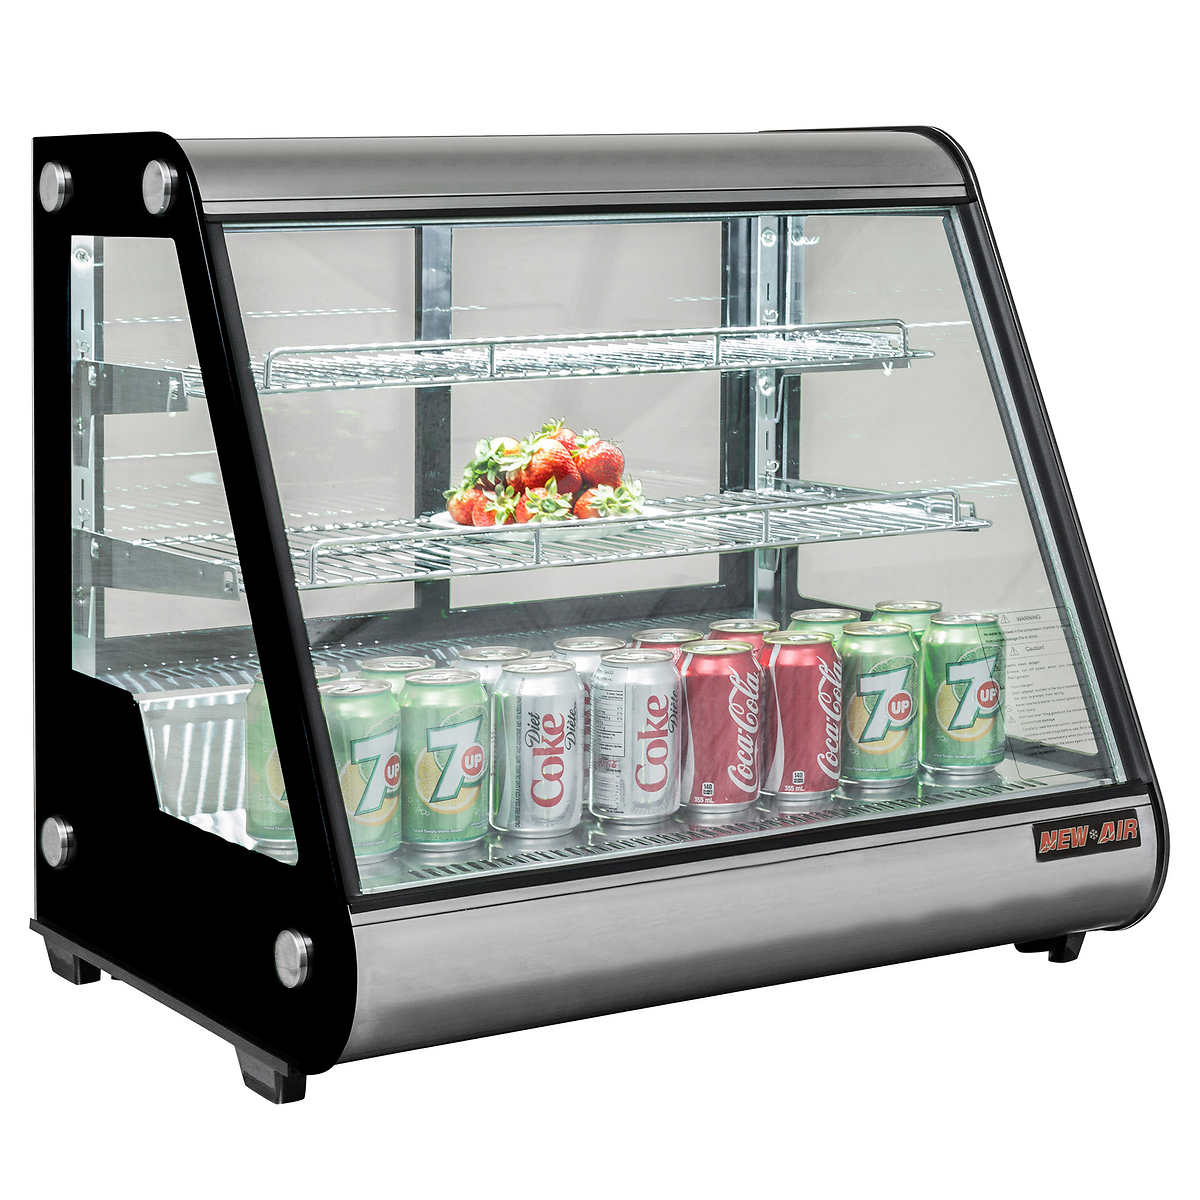 New Air 5 6 Cu Ft Refrigerated Countertop Display Case